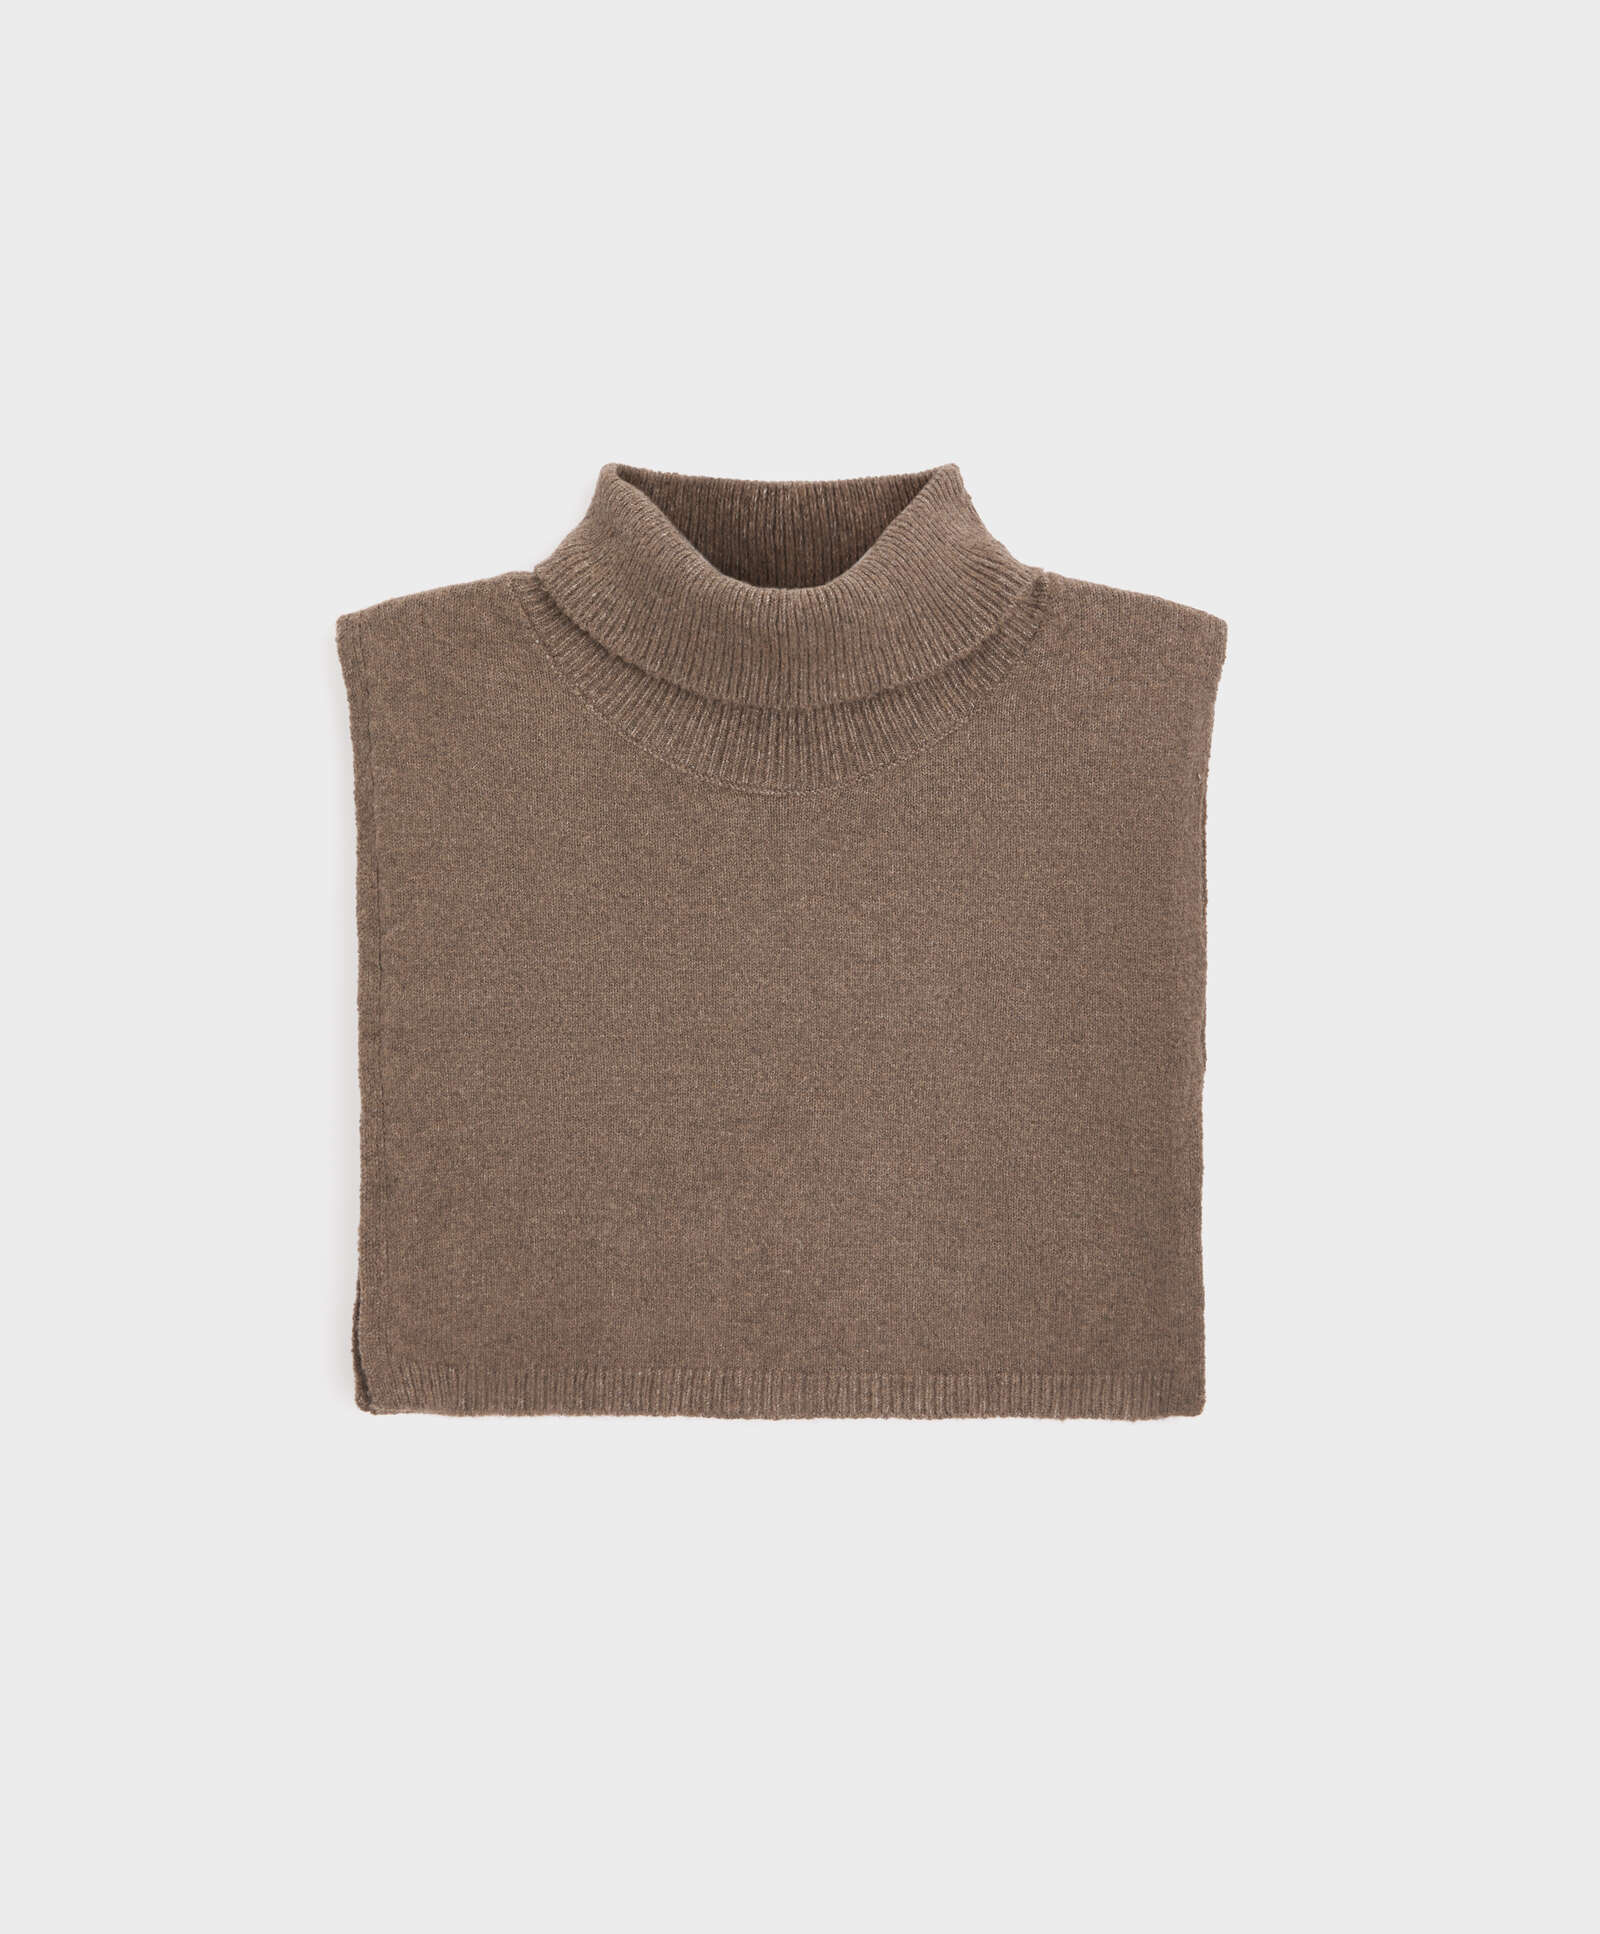 Knit snood - Knitwear - Accessories | OYSHO United States